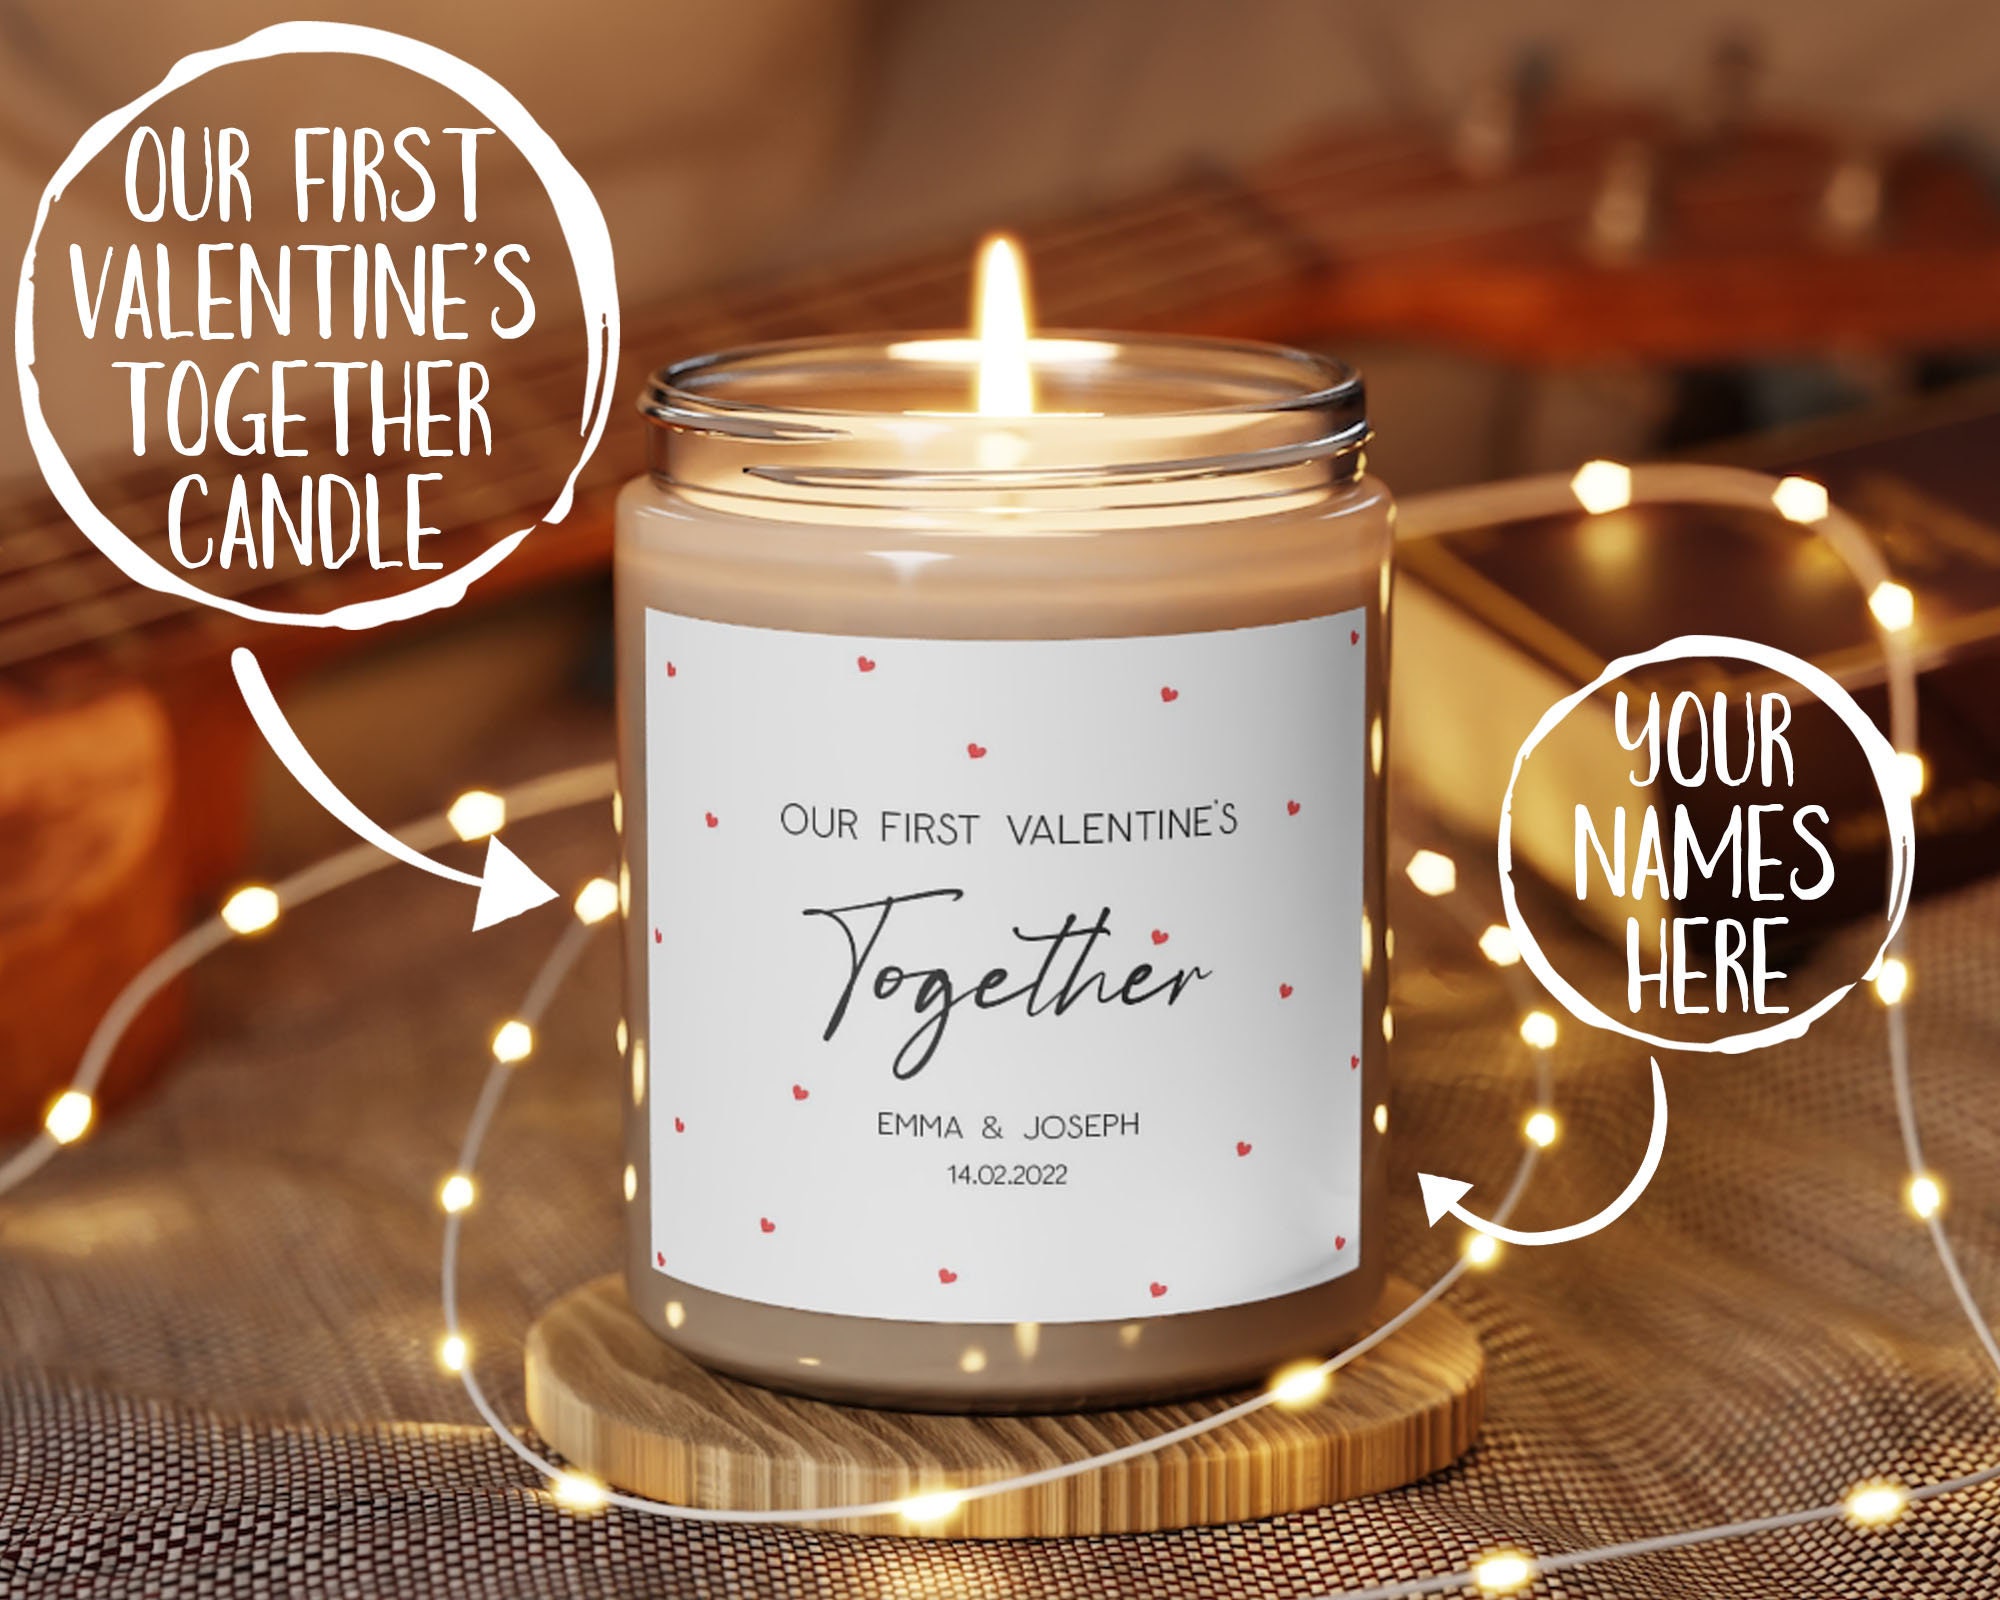 Our First Valentines Together Day Gift for Him or Her Candles Custom Handmade Girlfriend Couple Gifts Personalized Scented Soy Candle